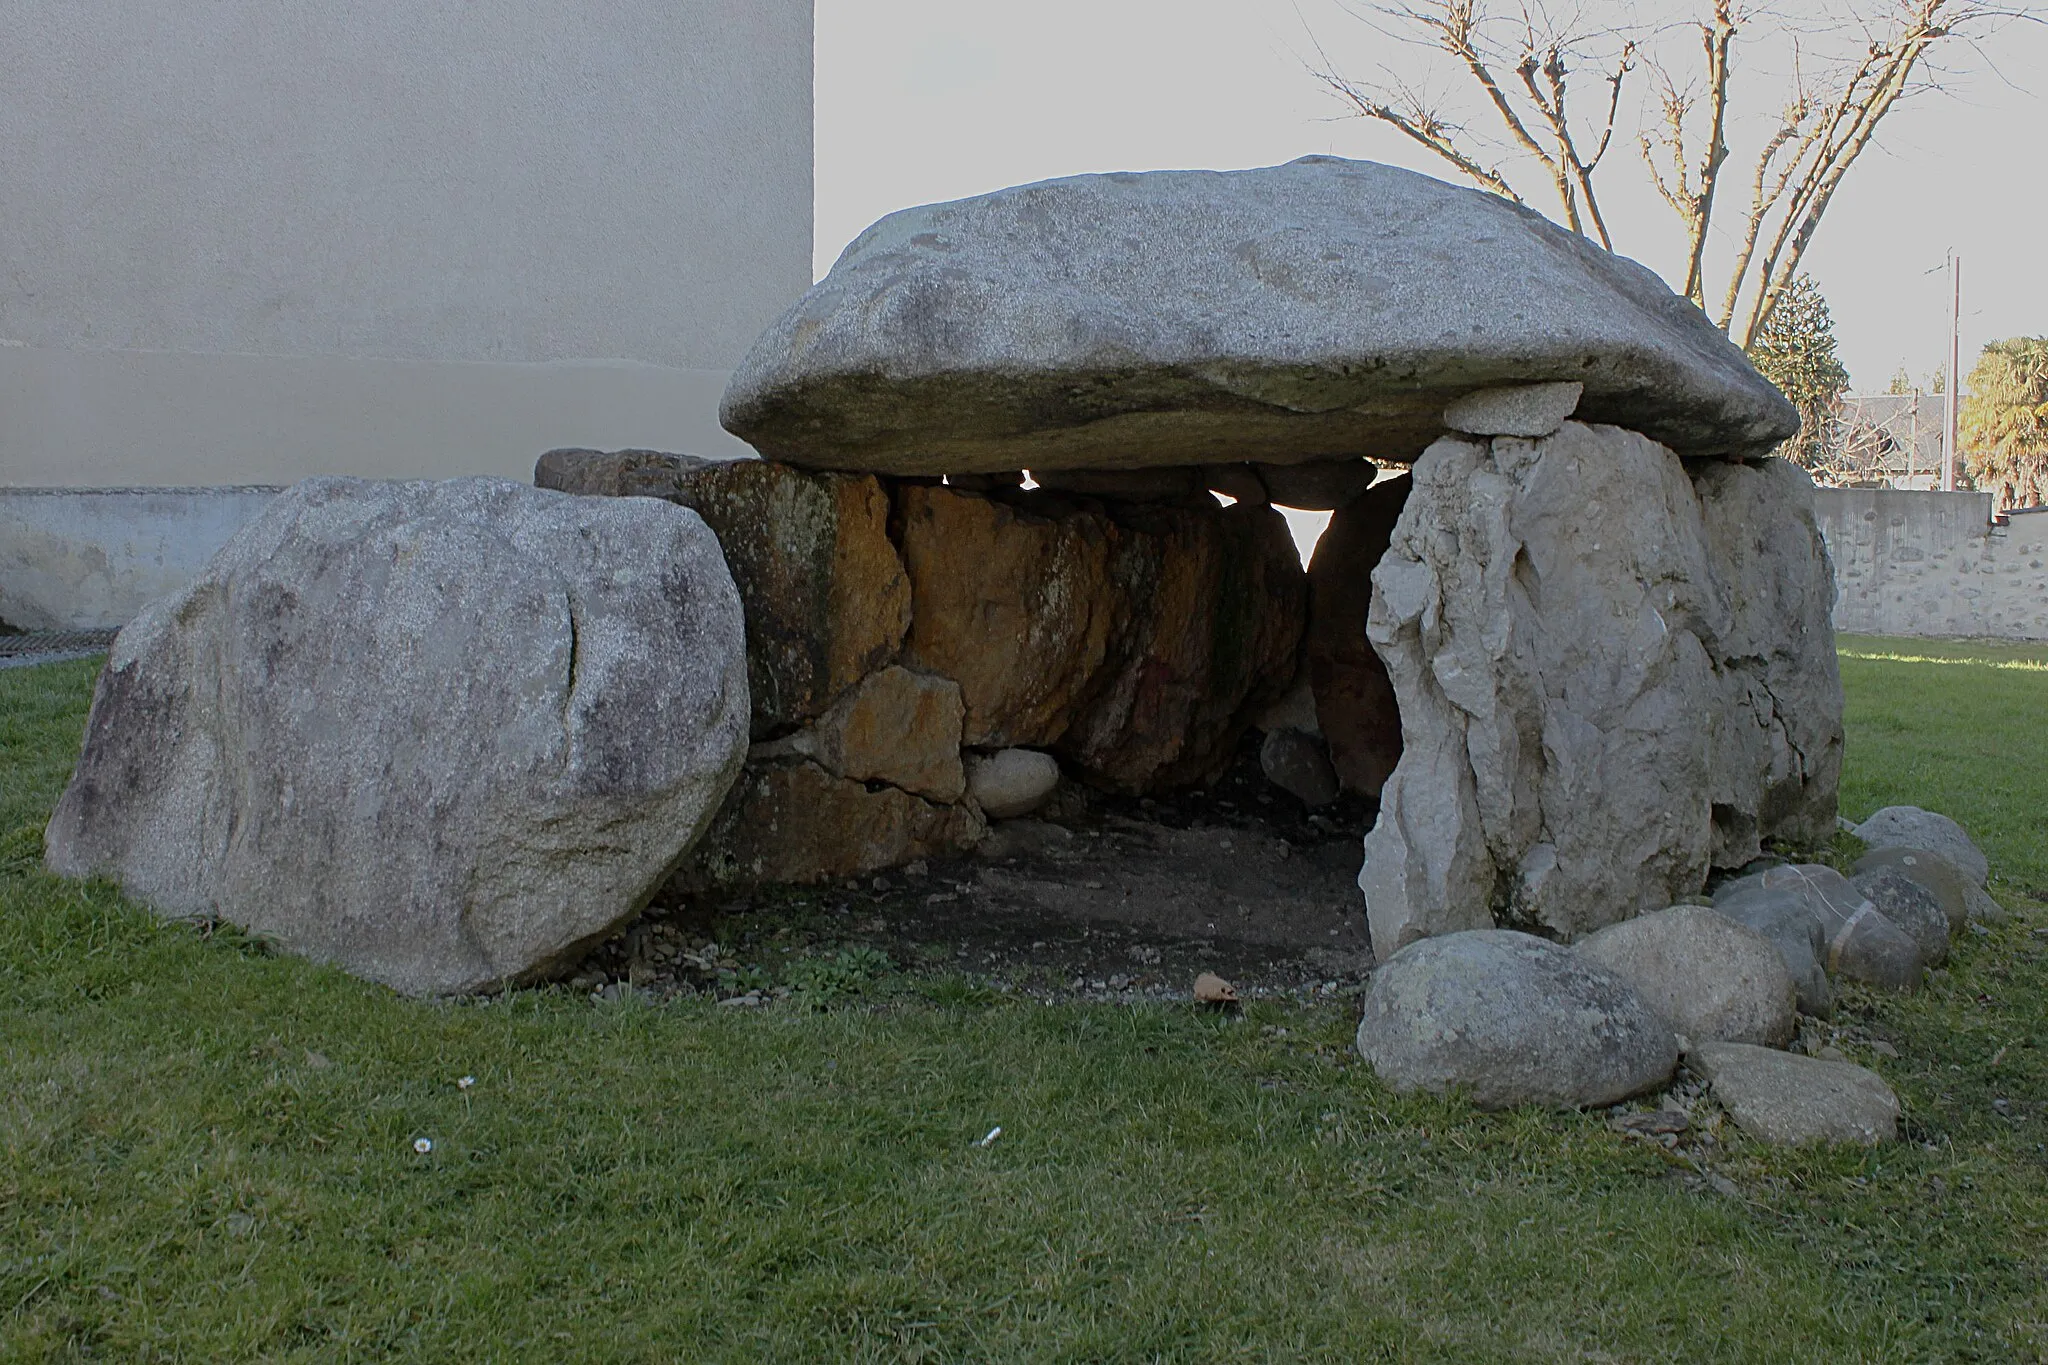 Photo showing: The dolmen of Barzun dates from 3500 to 4000 years ago, around the end of the Neolithic and start of the Bronze Age. It was discovered in 1968 in a field in Barzun. The original structure was about 20 x 10 metres
This oval burial mound had a height of 1,5 m at its highest point. As it was excavated, two tangent circles made of boulders appeared. In the second circle was discovered the dolmen itself. The room was to have received one or more burials accompanied by furniture and various valued items such as vases, polished axes, and flints. Unfortunately, the interior of the dolmen had certainly been violated at an early date, and archaeologists discovered nothing in it, neither bones nor vases or worked stone.
The dolmen was then dismantled in 1968 and moved in 1972 to Arudy (a village about 50 km from Barzun) by Georges Laplace, research fellow at the CNRS. In 1990, Laplace moved from Arudy to Coarraze and gave the dolmen to the Municipality of the commune, which installed it on the Town Hall Square.
Barzun, in 1995, tried to have the dolmen brought back to the village, but with no success.
In 2010, a understanding was reached between Jean Saint-Josse (the Mayor of Coarraze) and , Maurice Minvielle (Mayor of Barzun). Coarraze Council then authorised the return of the dolmen to its barzunaise origins.
It was described in several stories as "the travelling dolmen."

The transfer from Coarraze took place in January 2011, and the installation on an old cemetery by the church of Barzun took place on January 13, 2012.